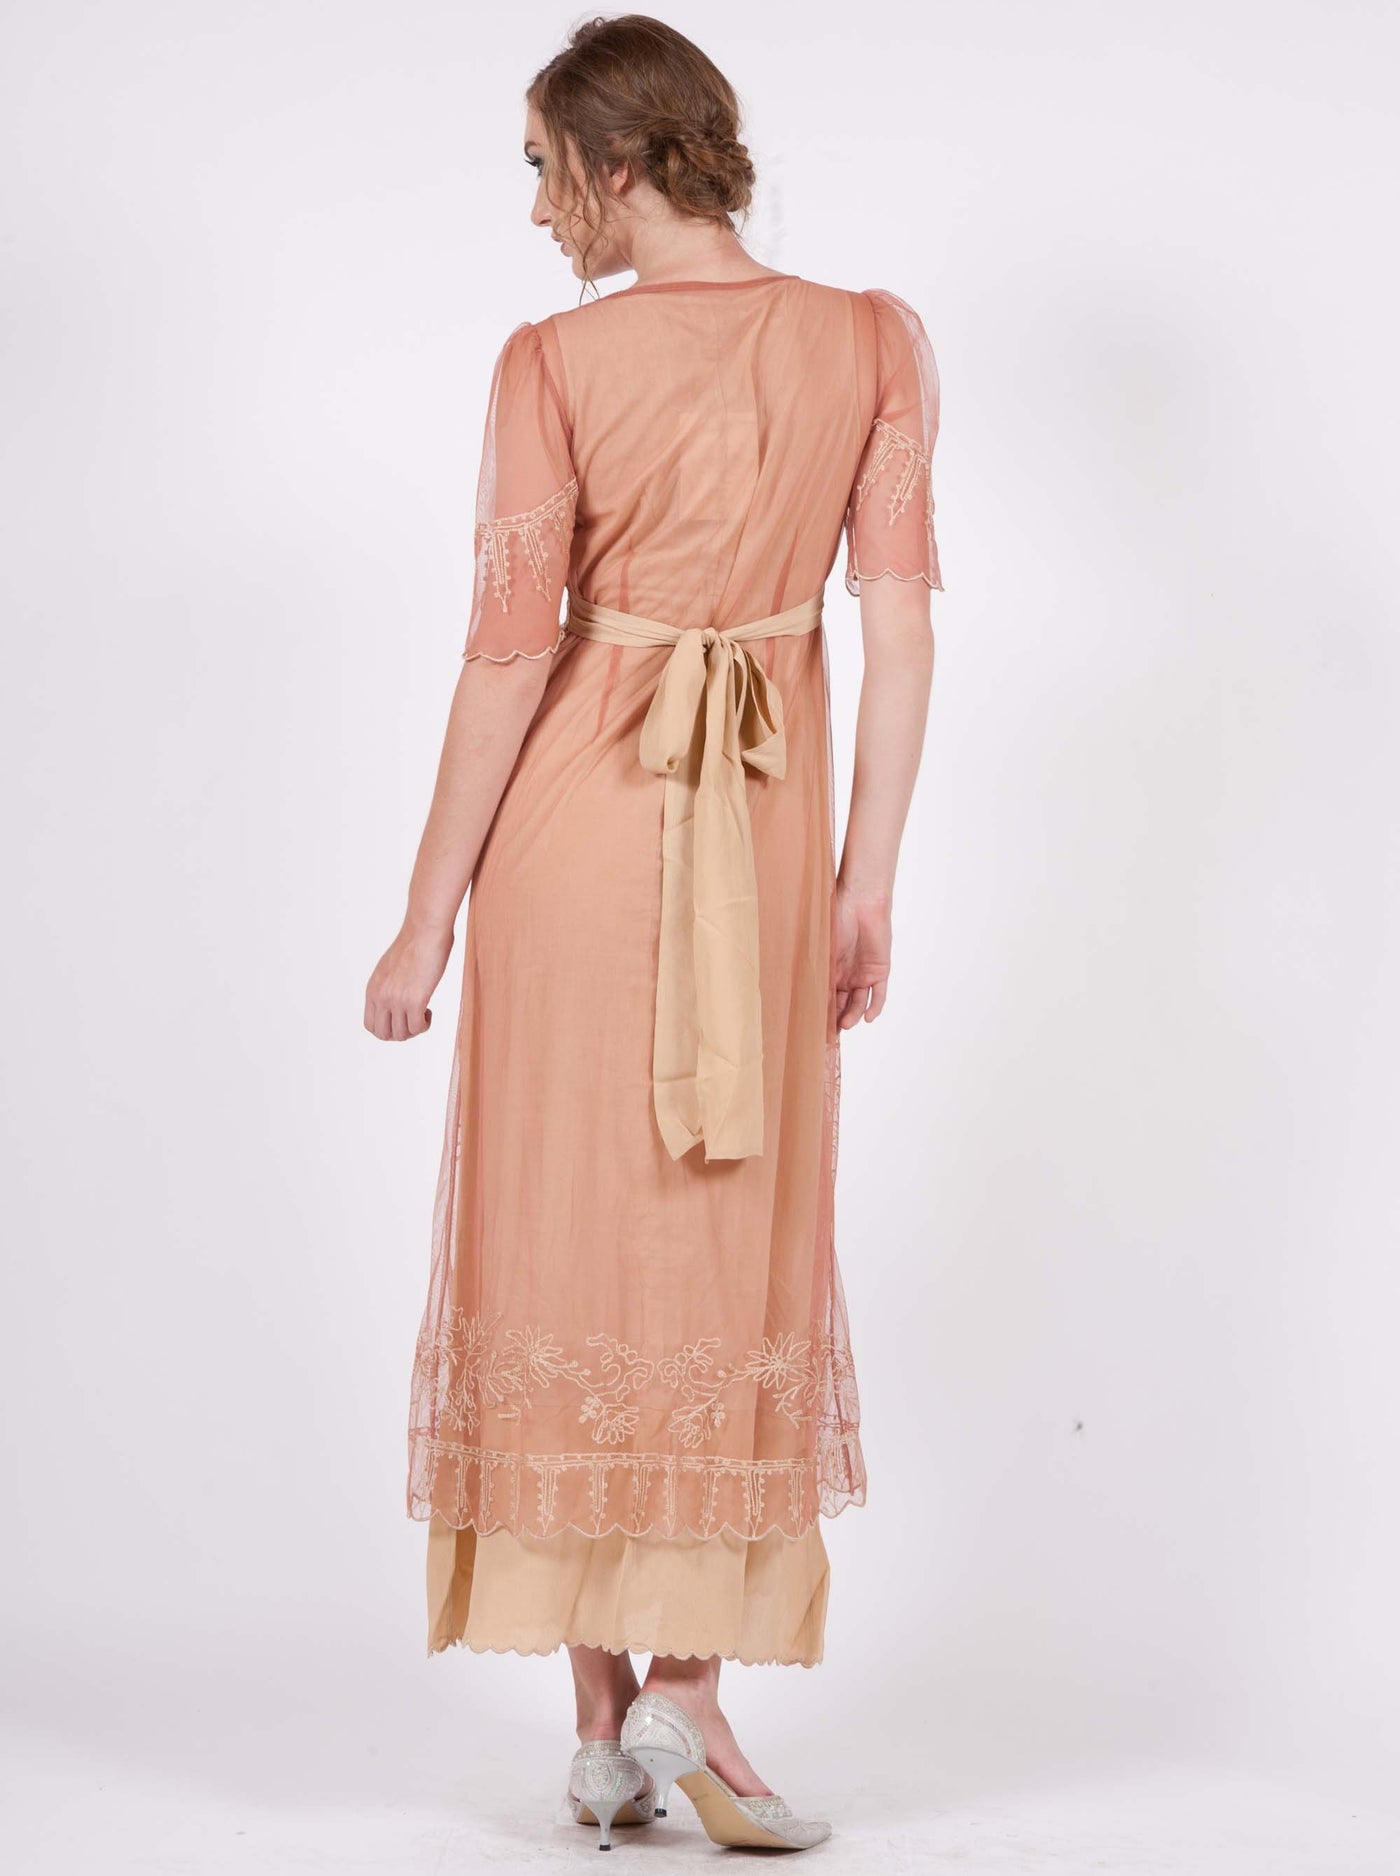 New Vintage Titanic Tea Party Dress in Rose-Gold by Nataya - SOLD OUT